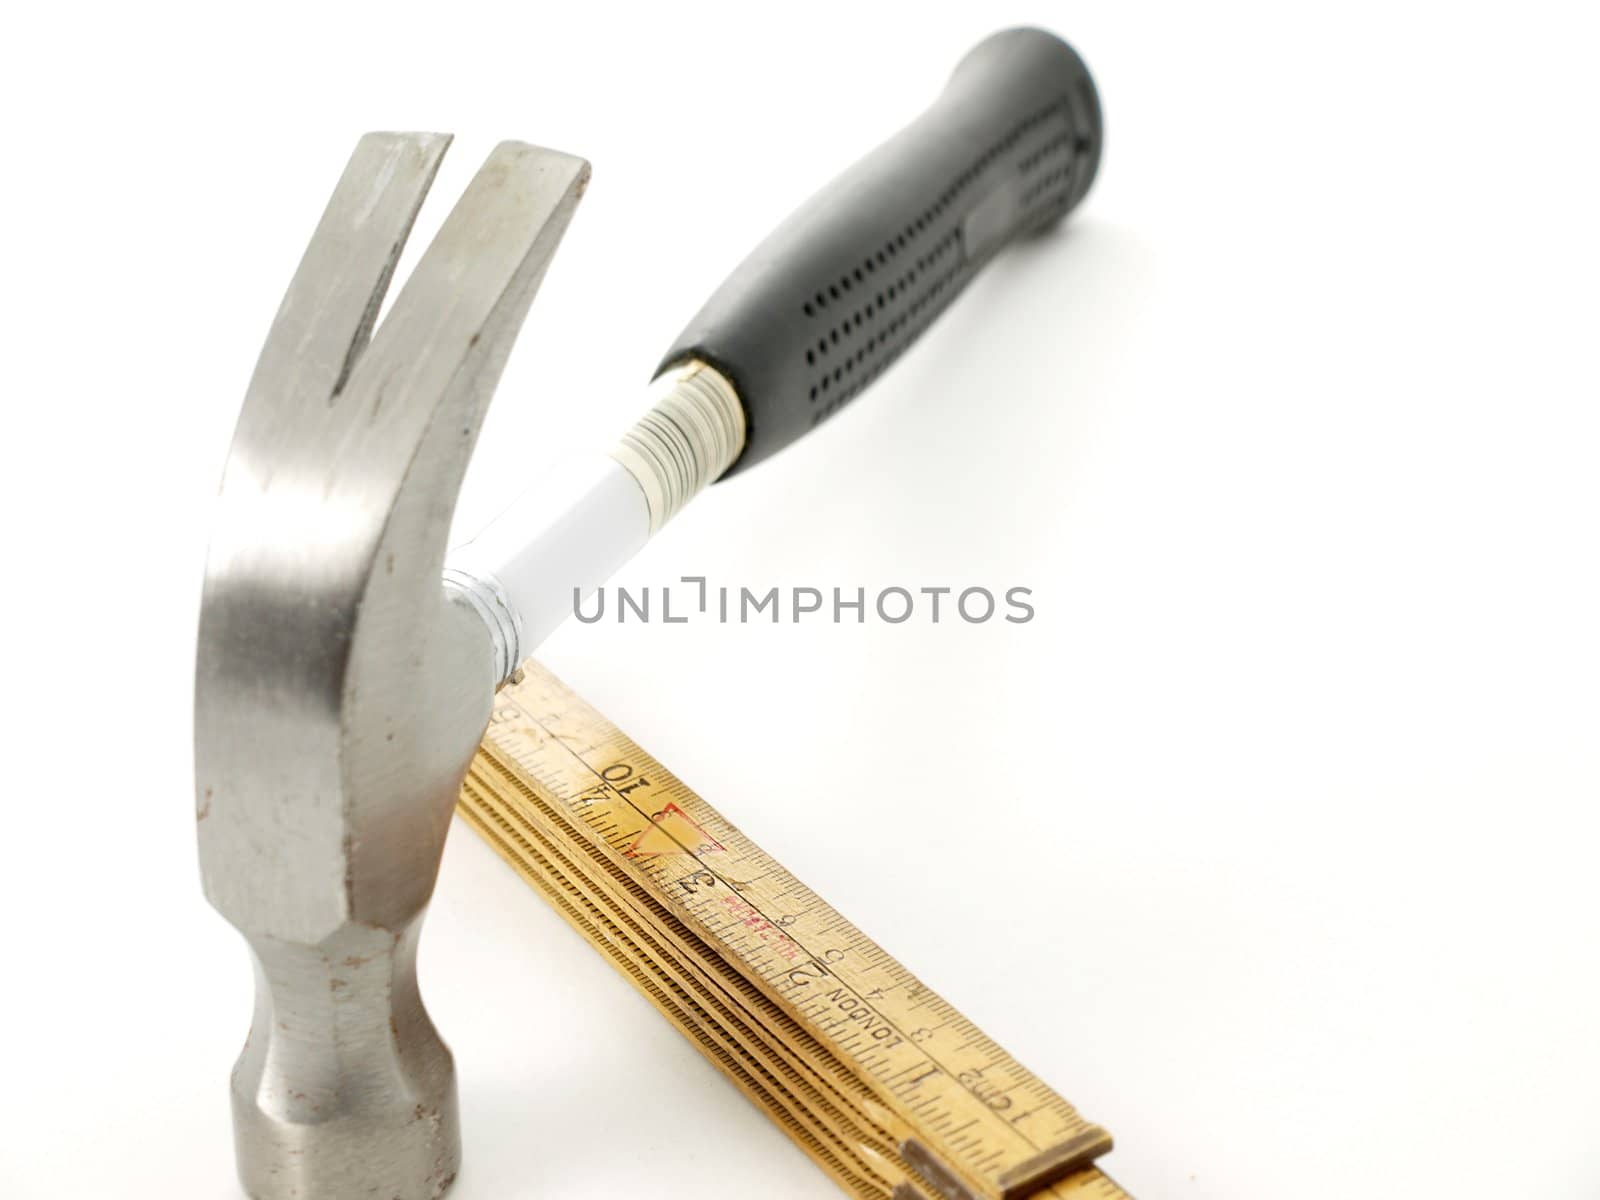 Hammer and wooden measurement tool, towards white background